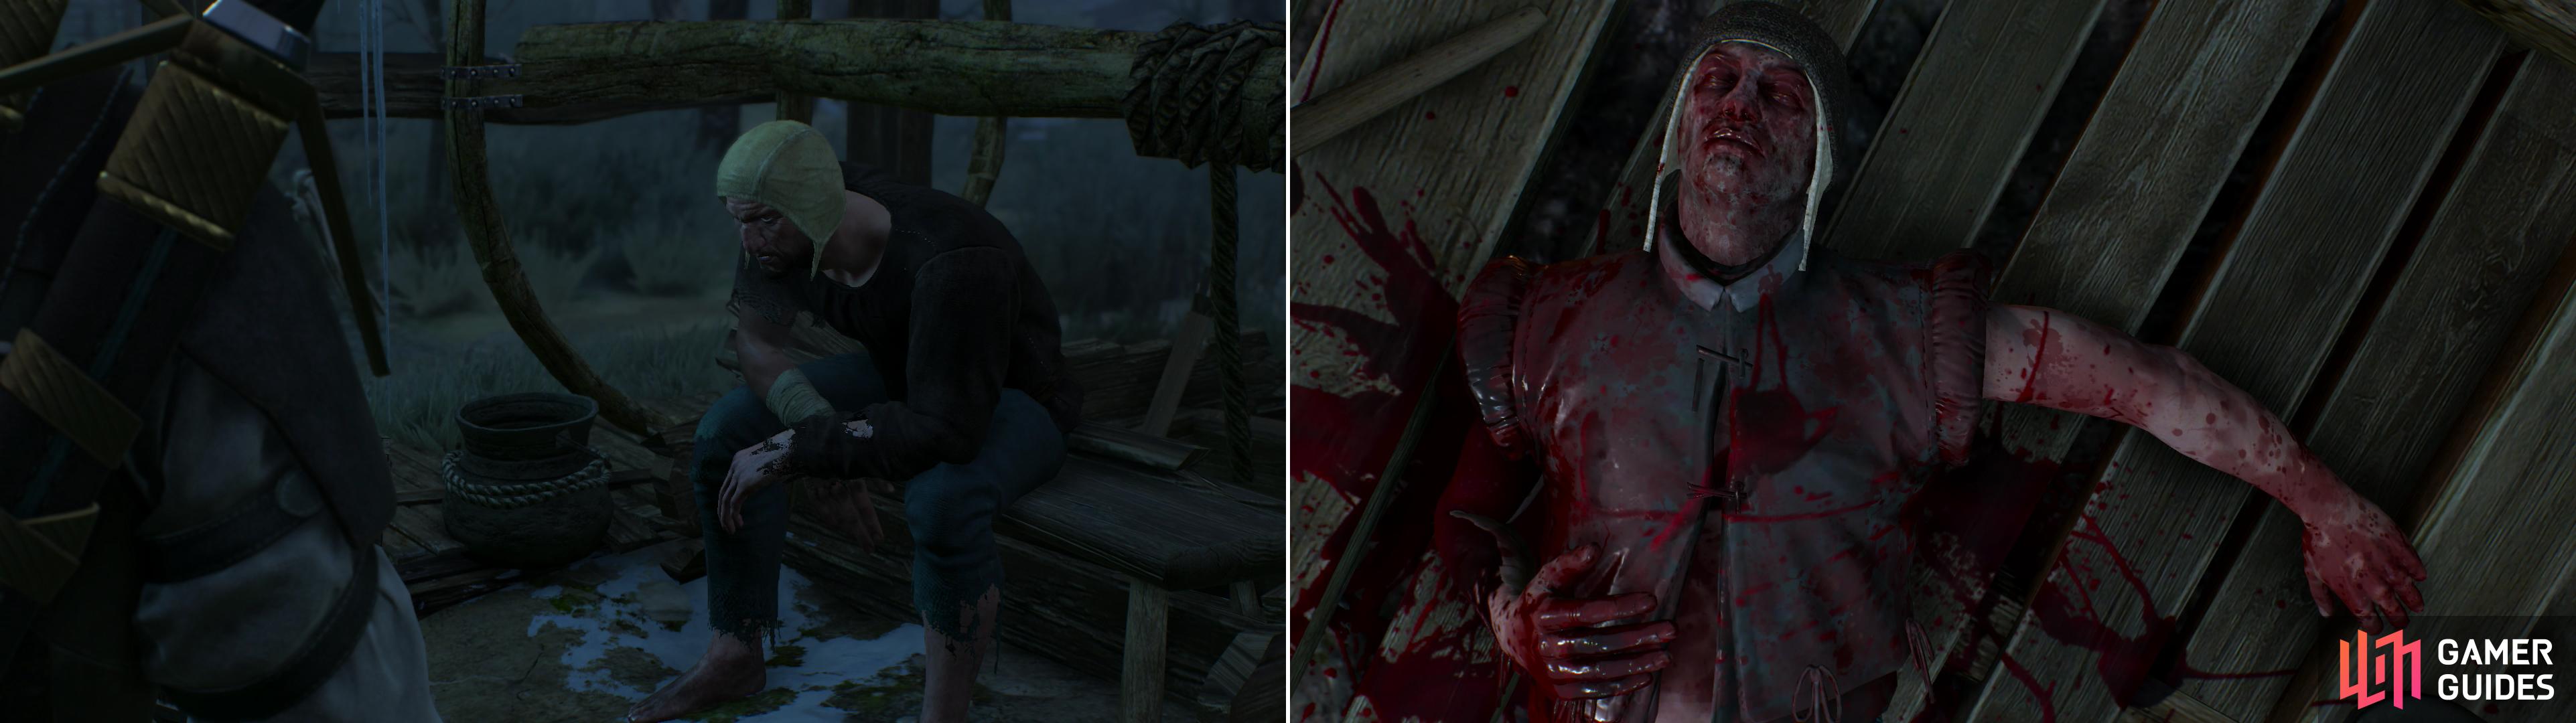 The sole survivor of the attack at Heatherton is understandly shaken (left). The Nilfgaardian spy wasn't kindly treated by the Wild Hunt (right).